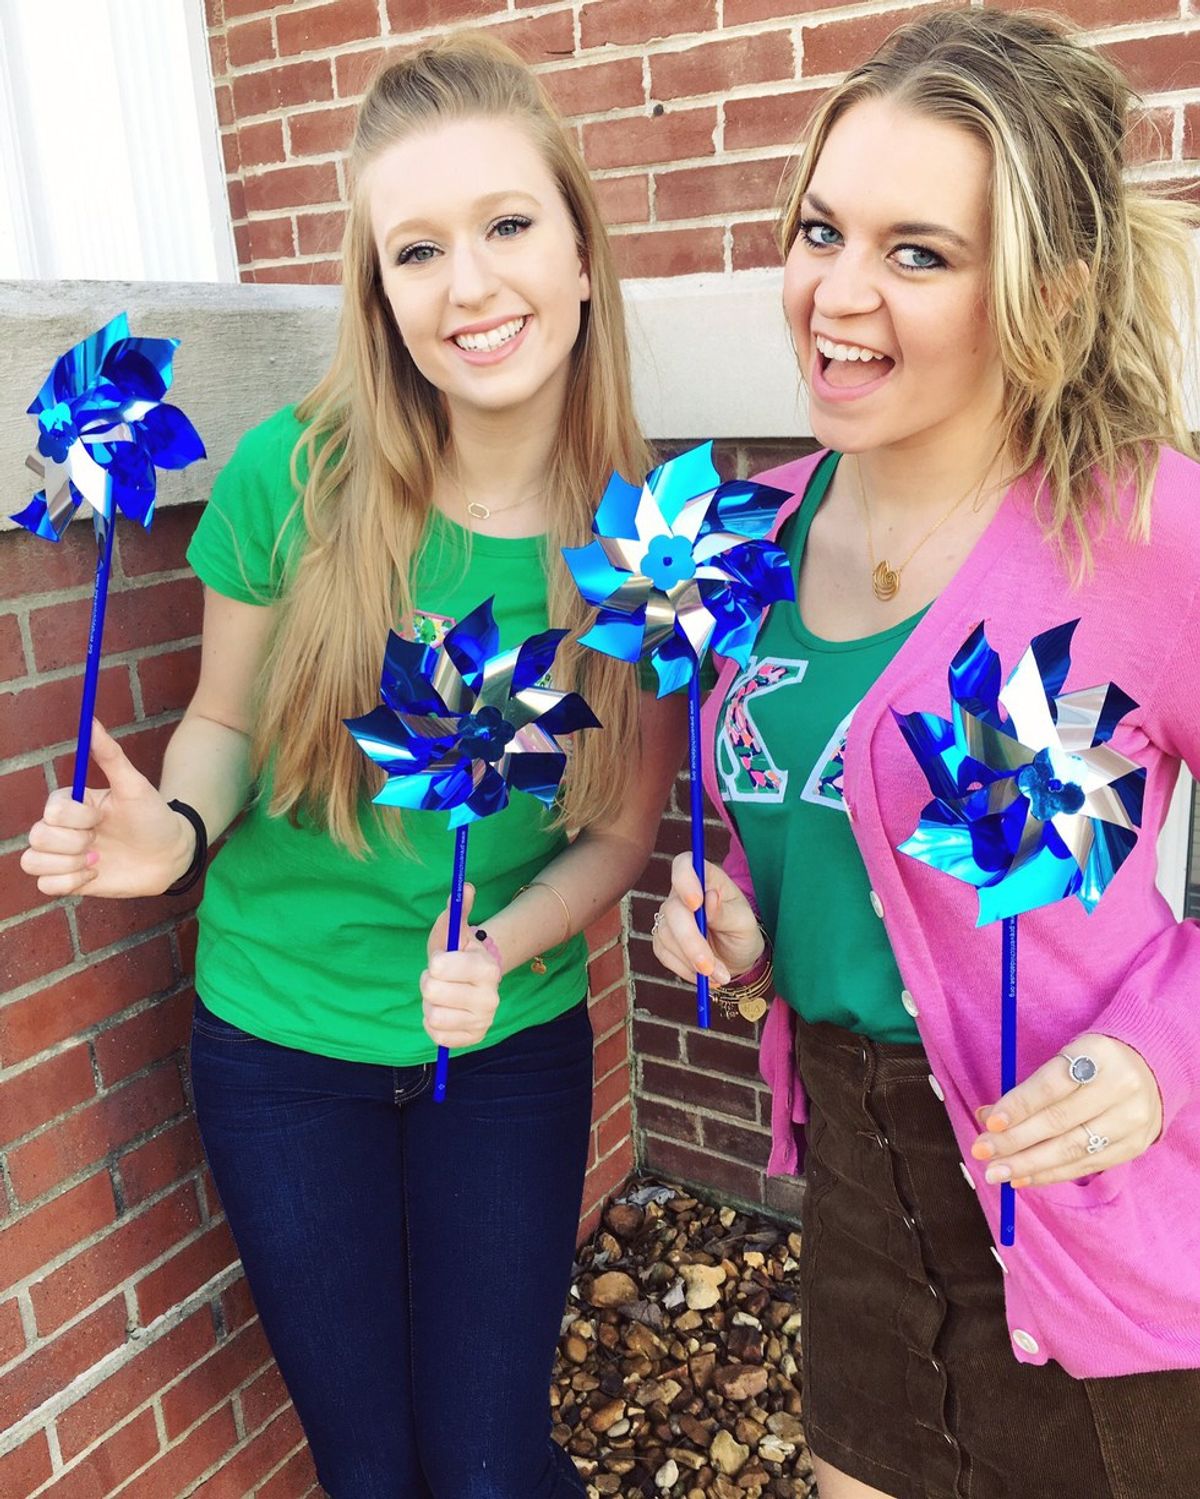 Advice For PNM’s From Two Sorority Women